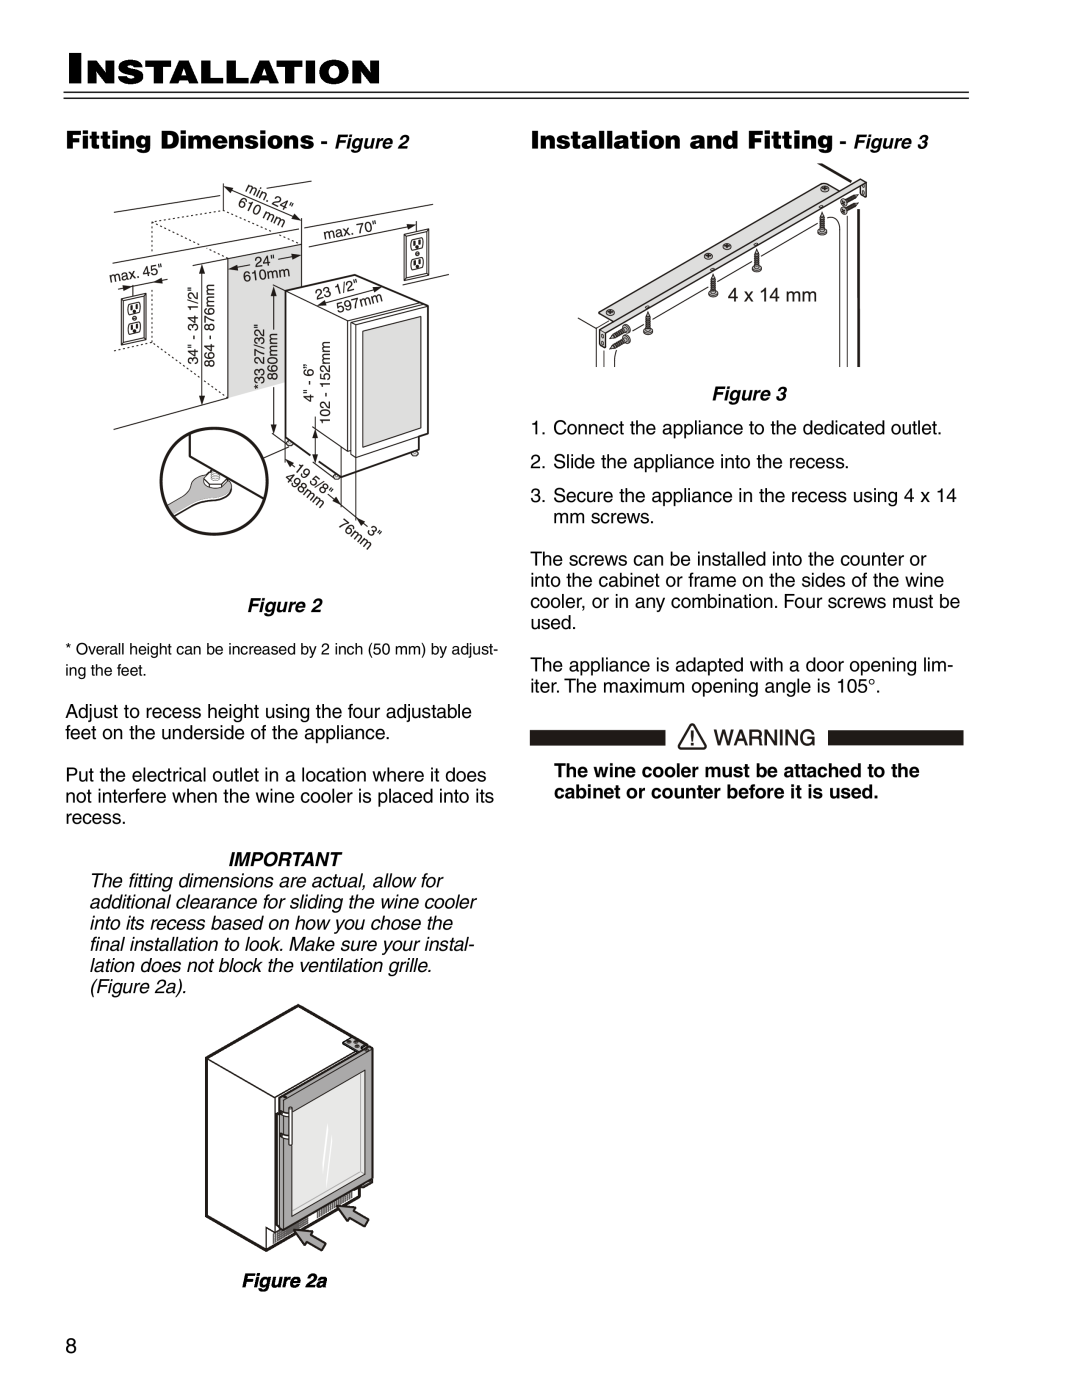 Liebherr WU 40 manual Fitting Dimensions - Figure, Installation and Fitting - Figure 